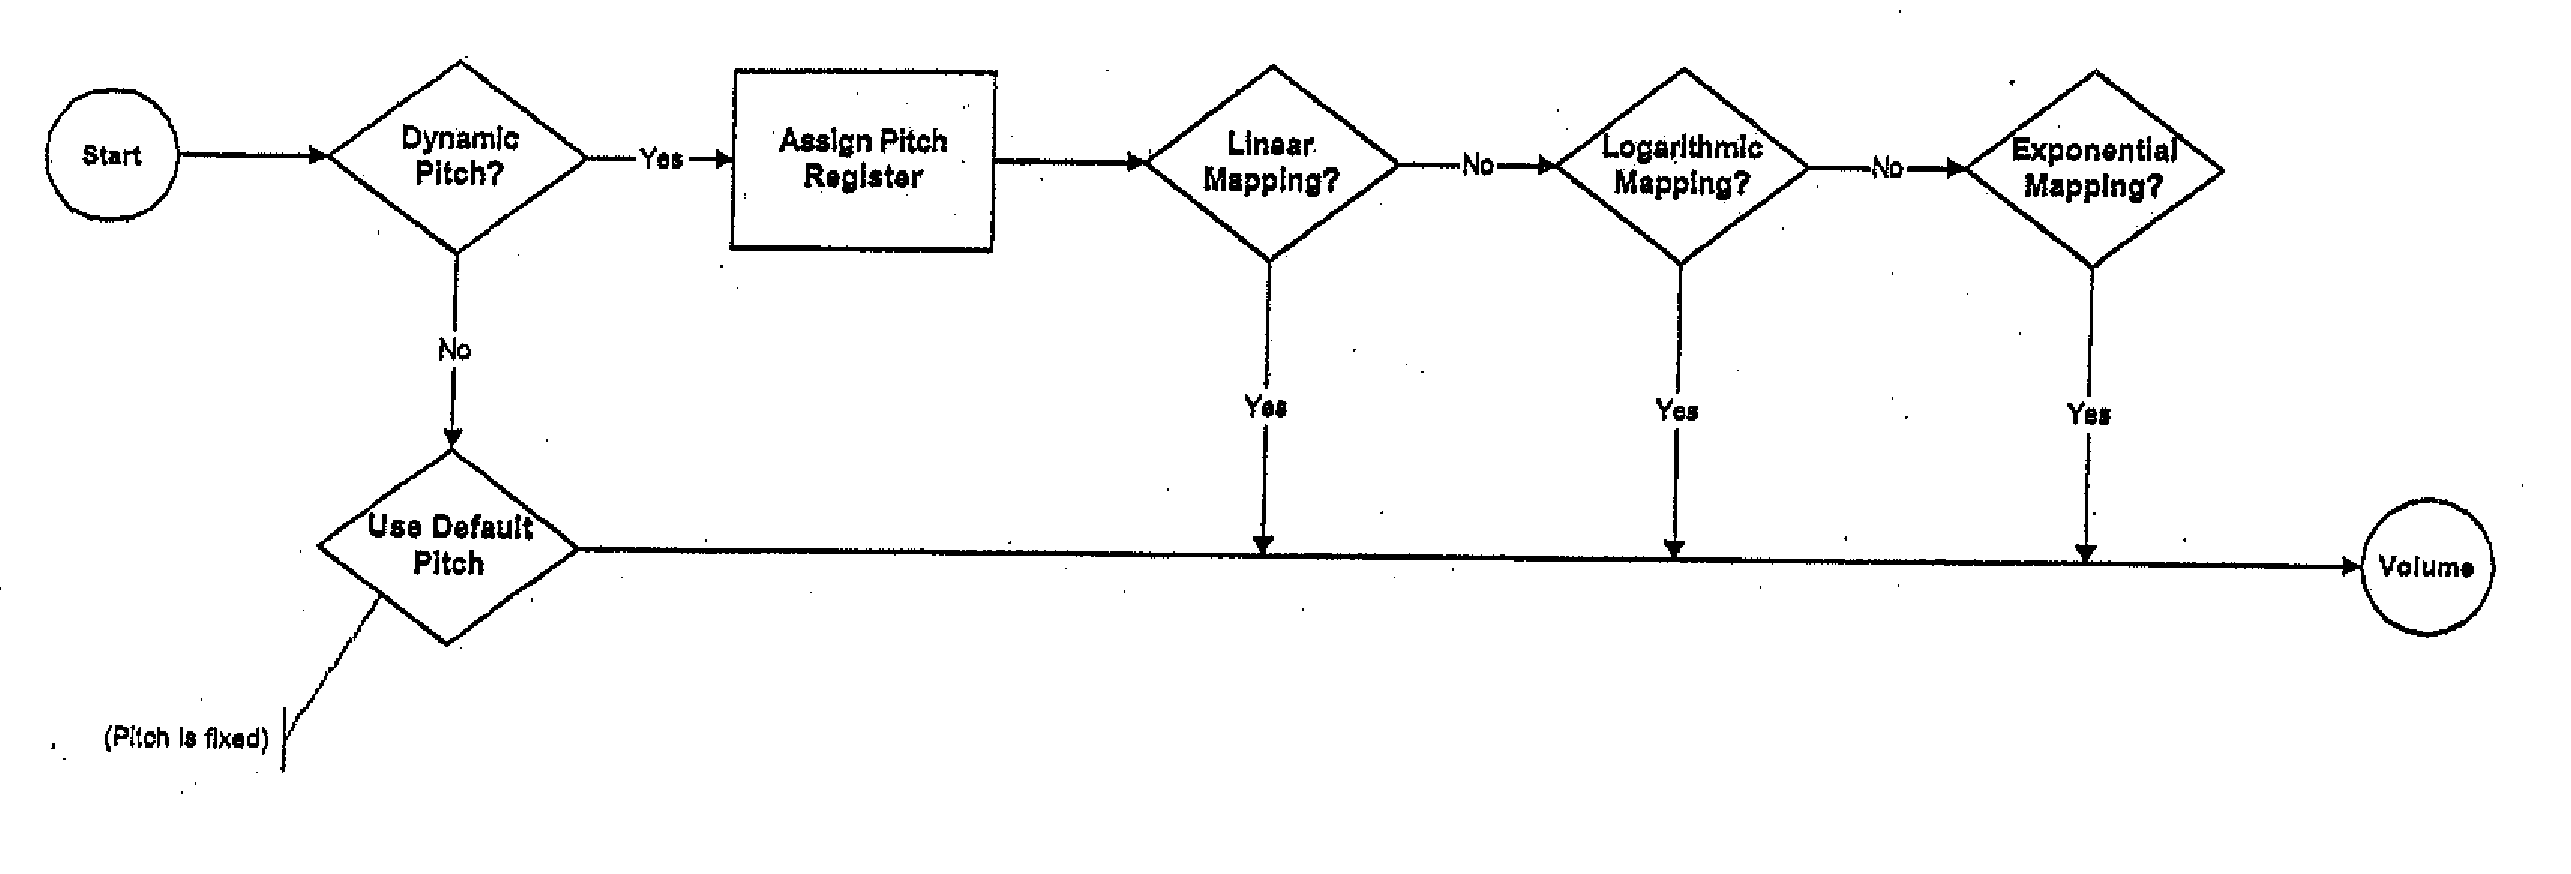 System and method for musical sonification of data